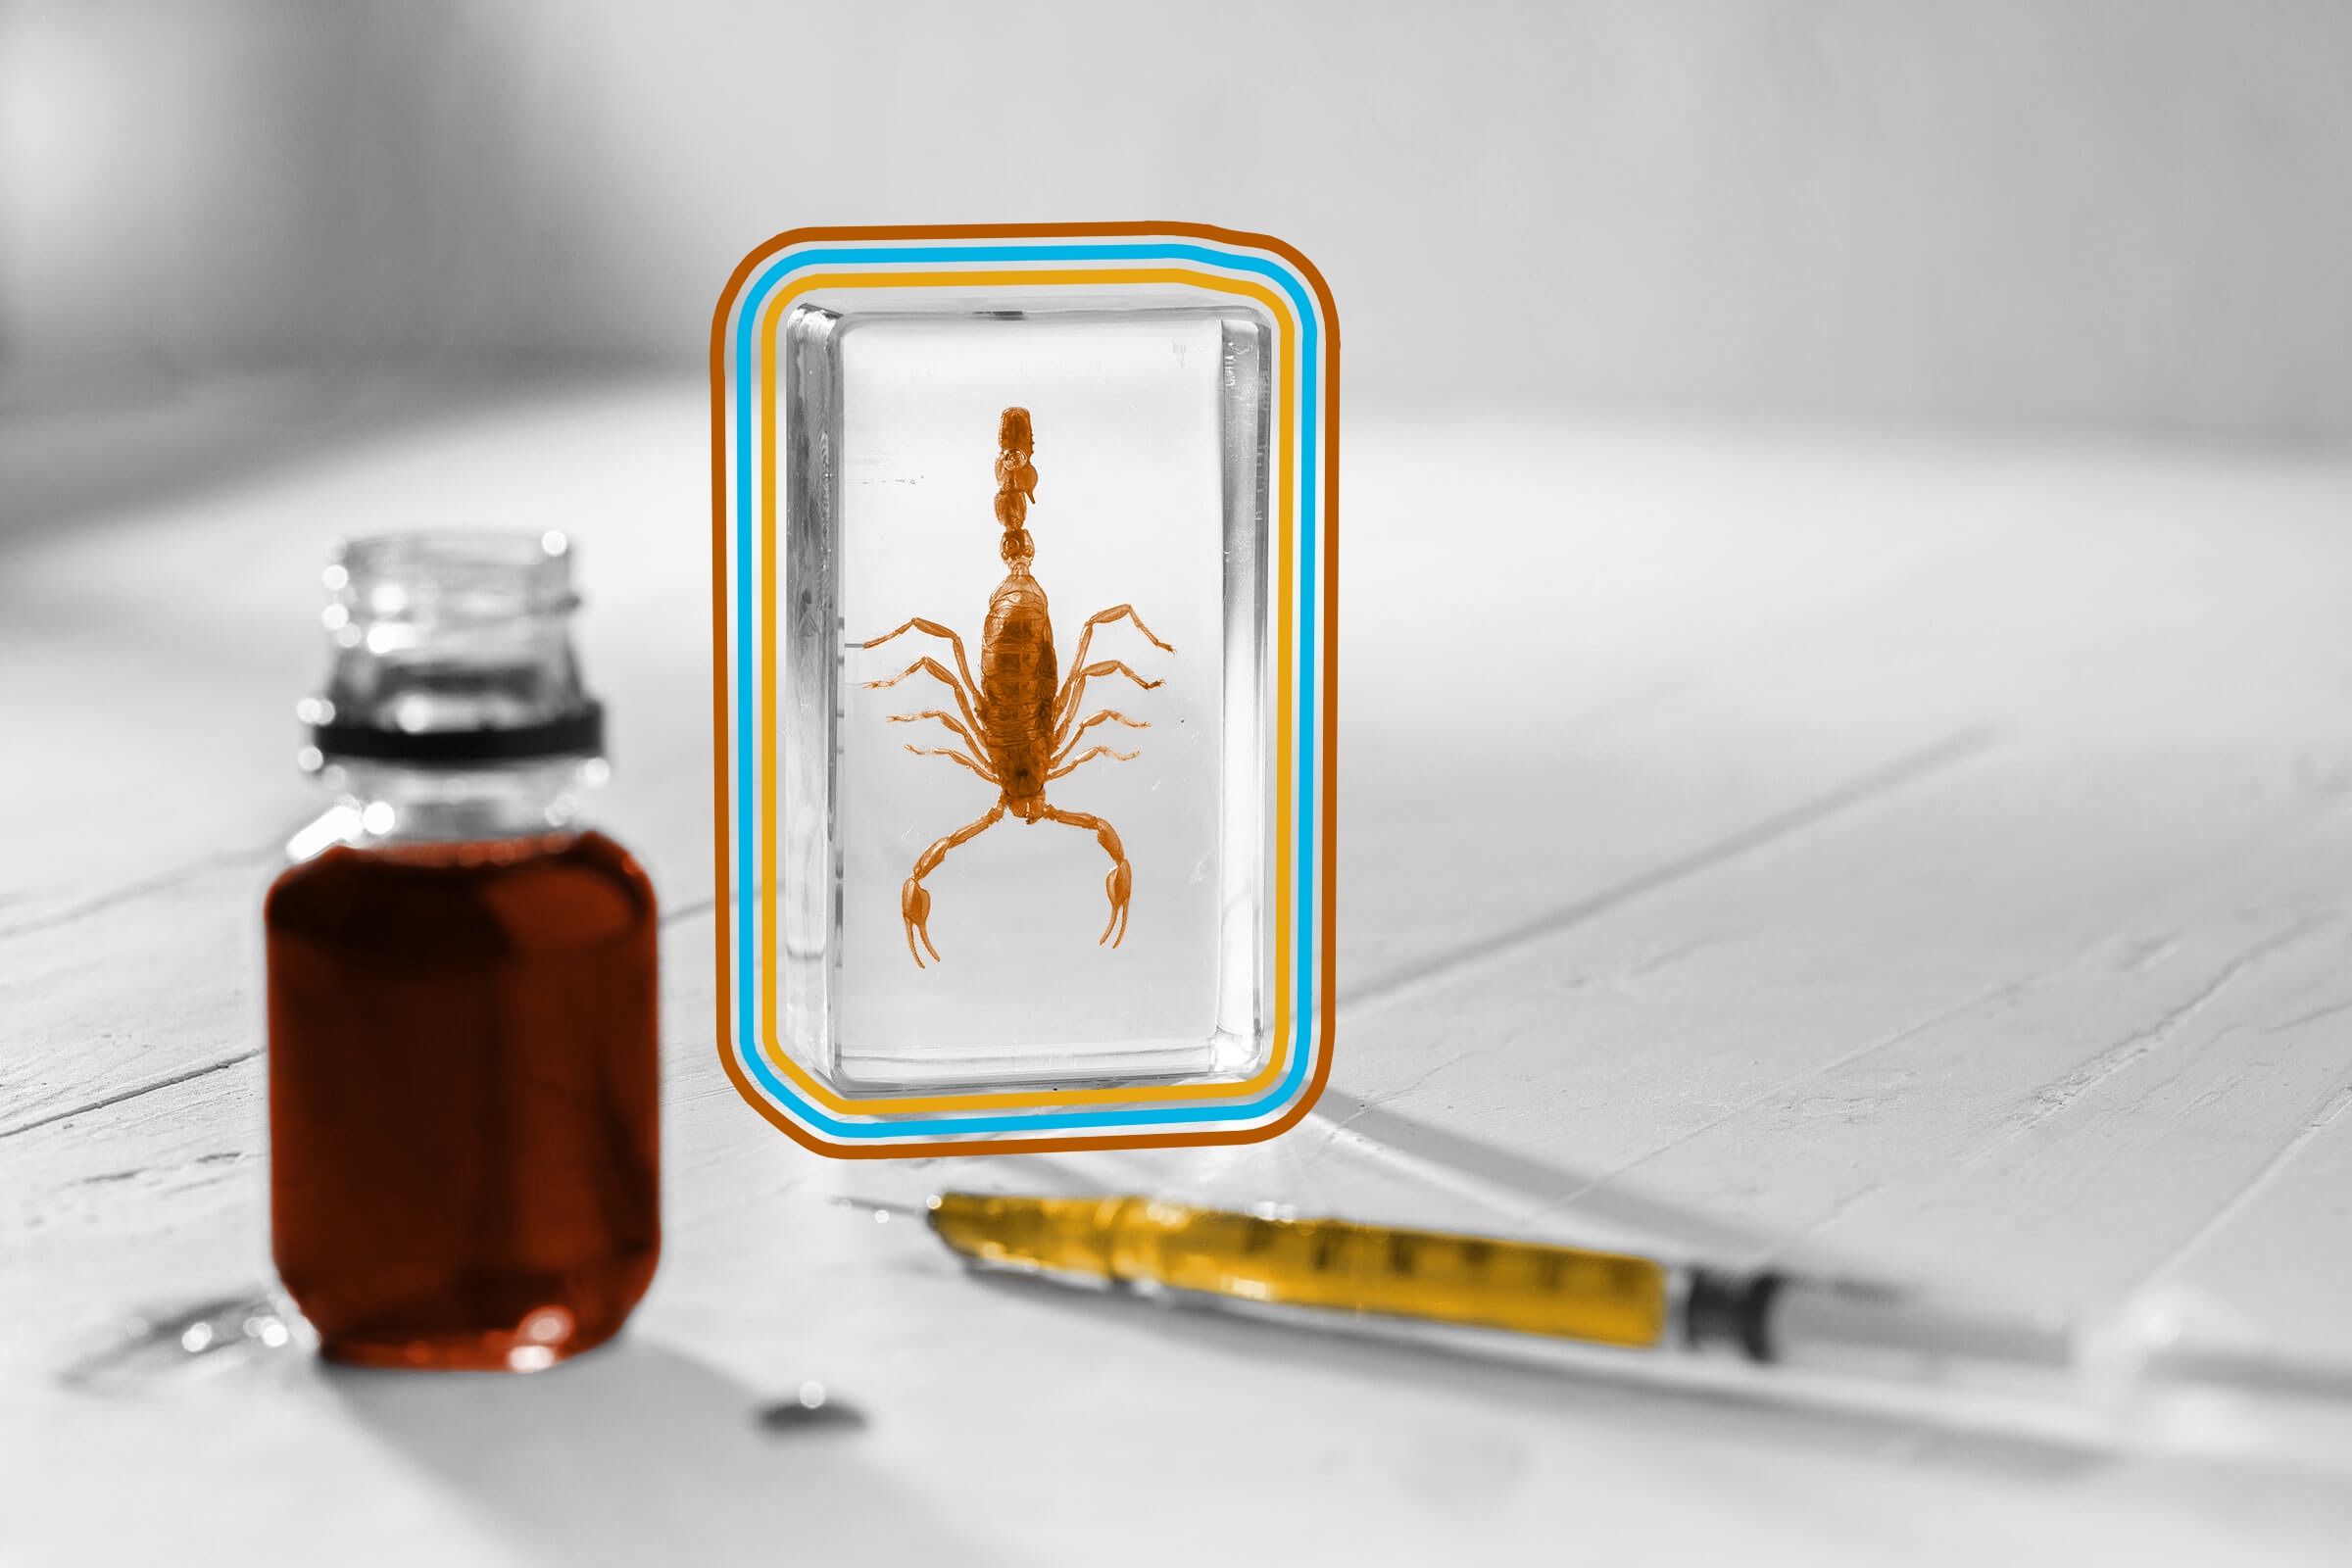 Scorpion venom is among the most expensive liquids on the market.